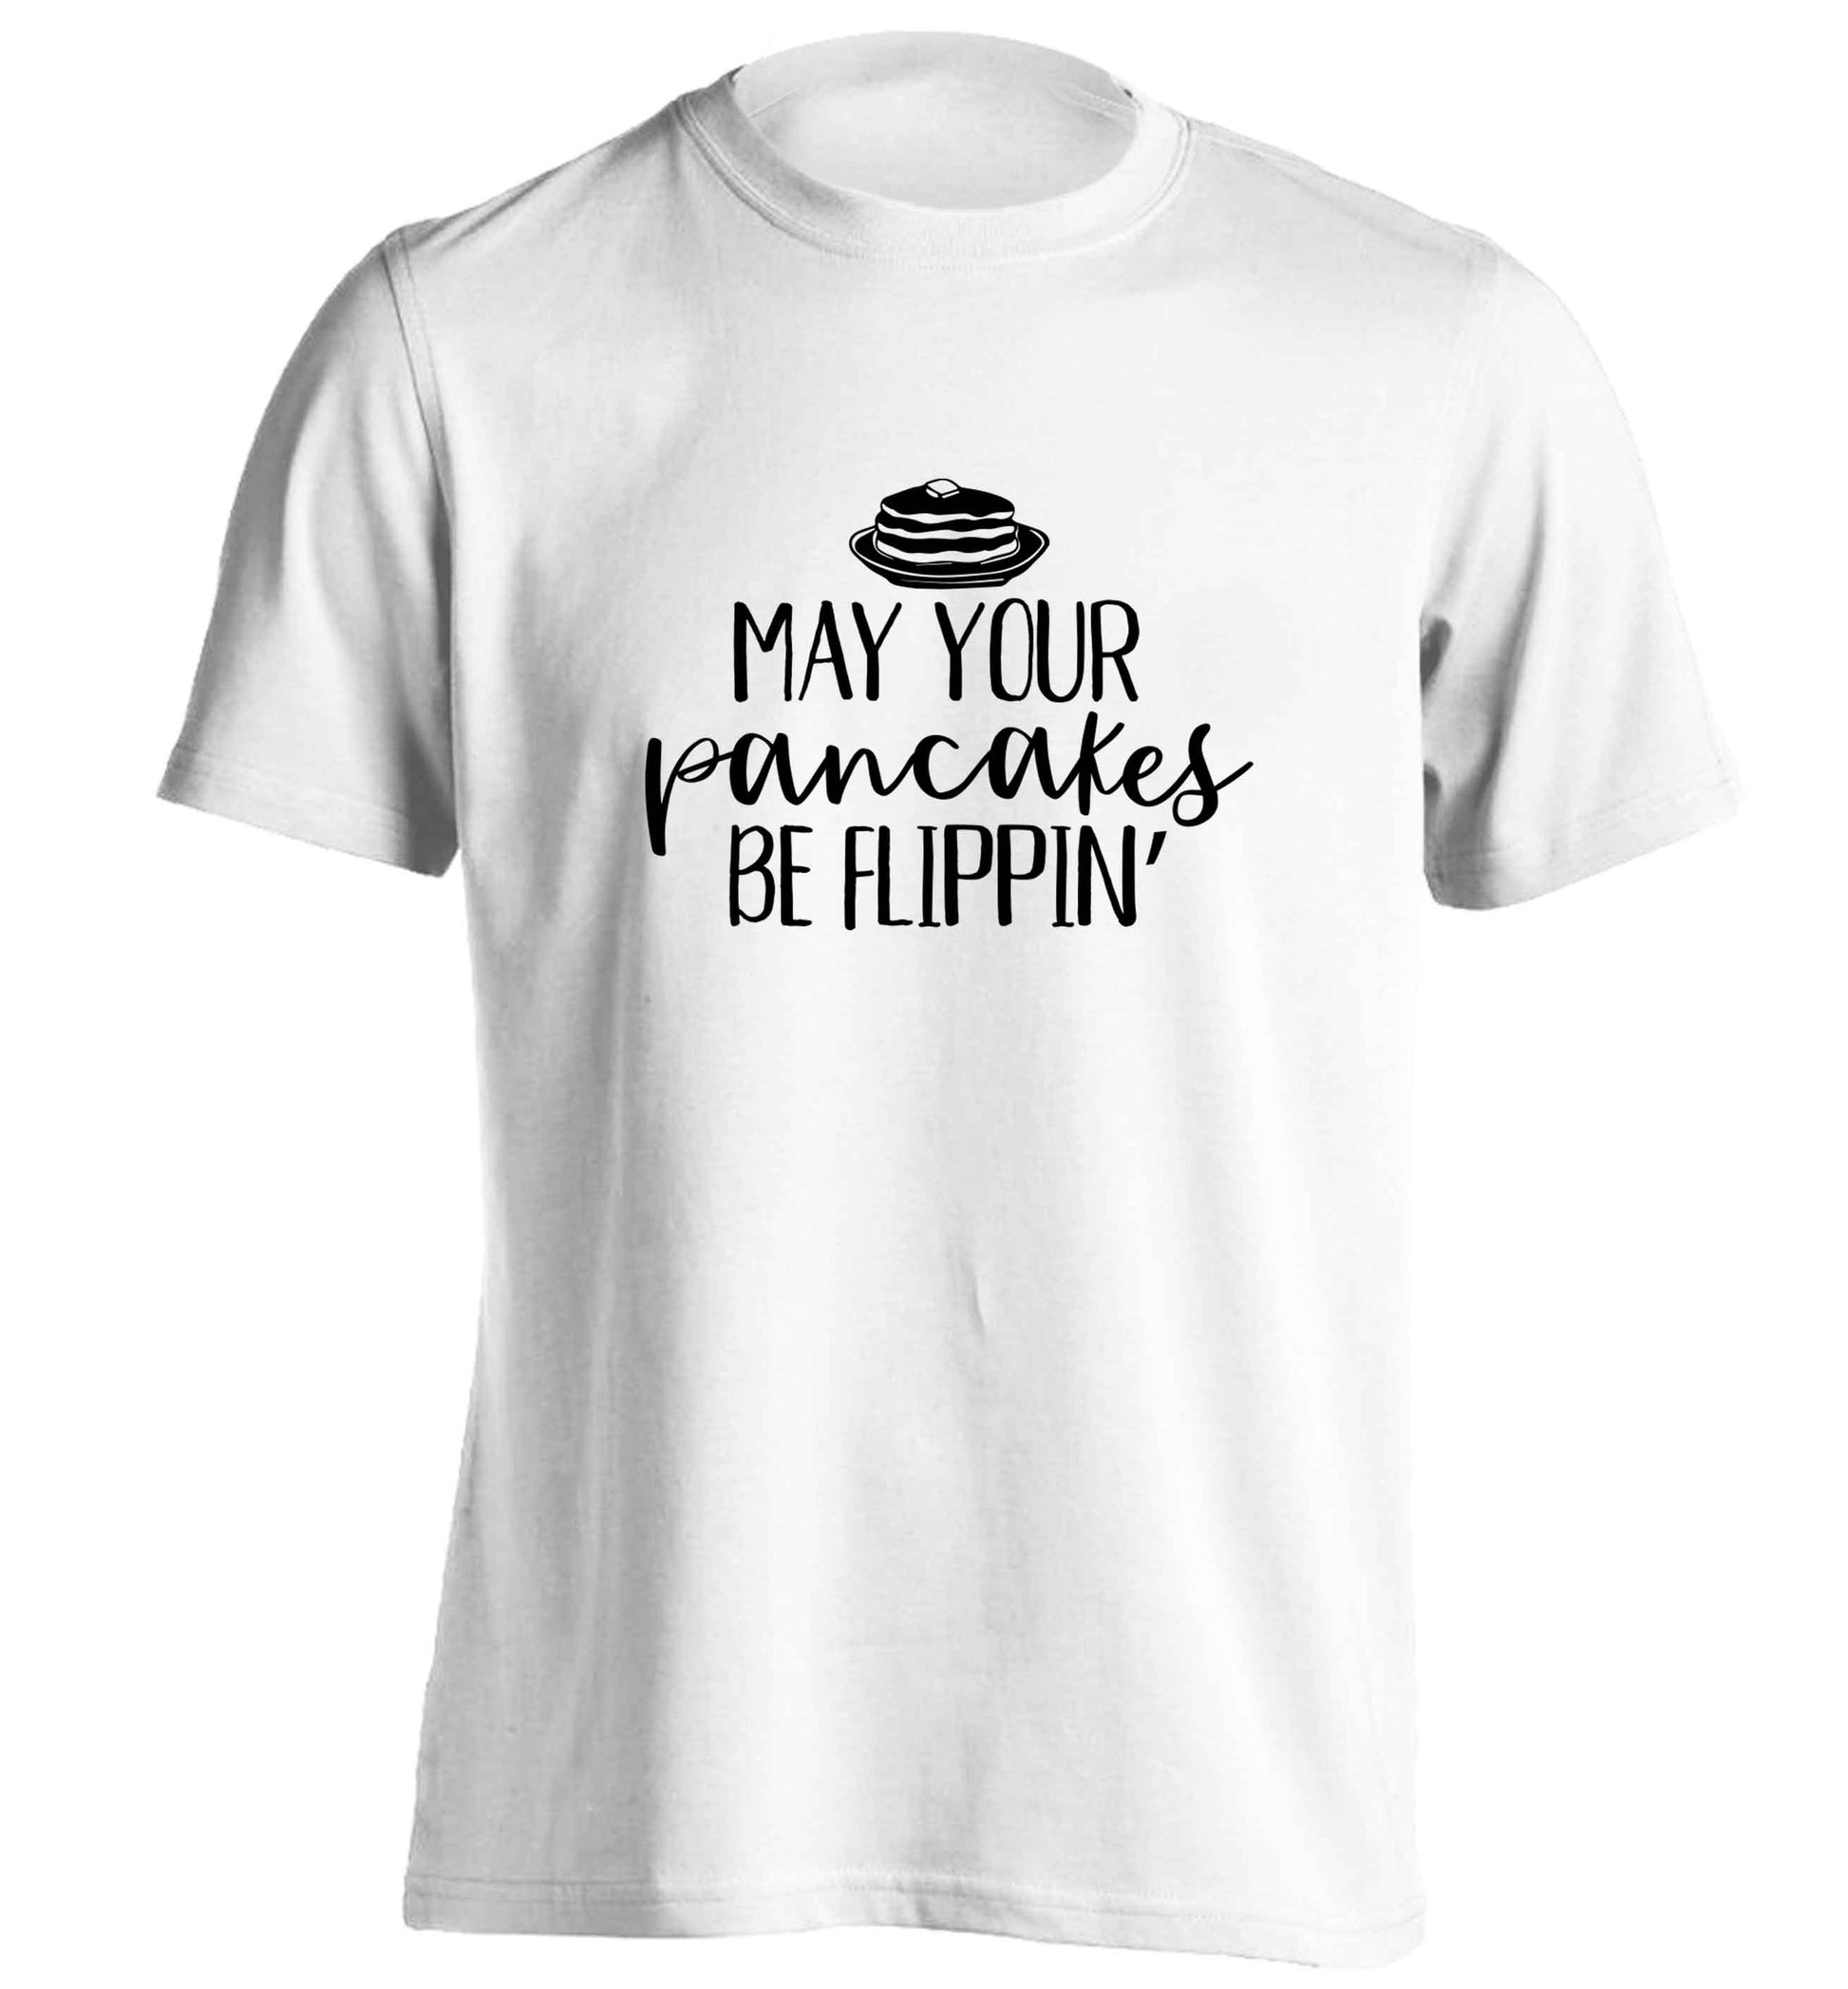 May your pancakes be flippin' adults unisex white Tshirt 2XL